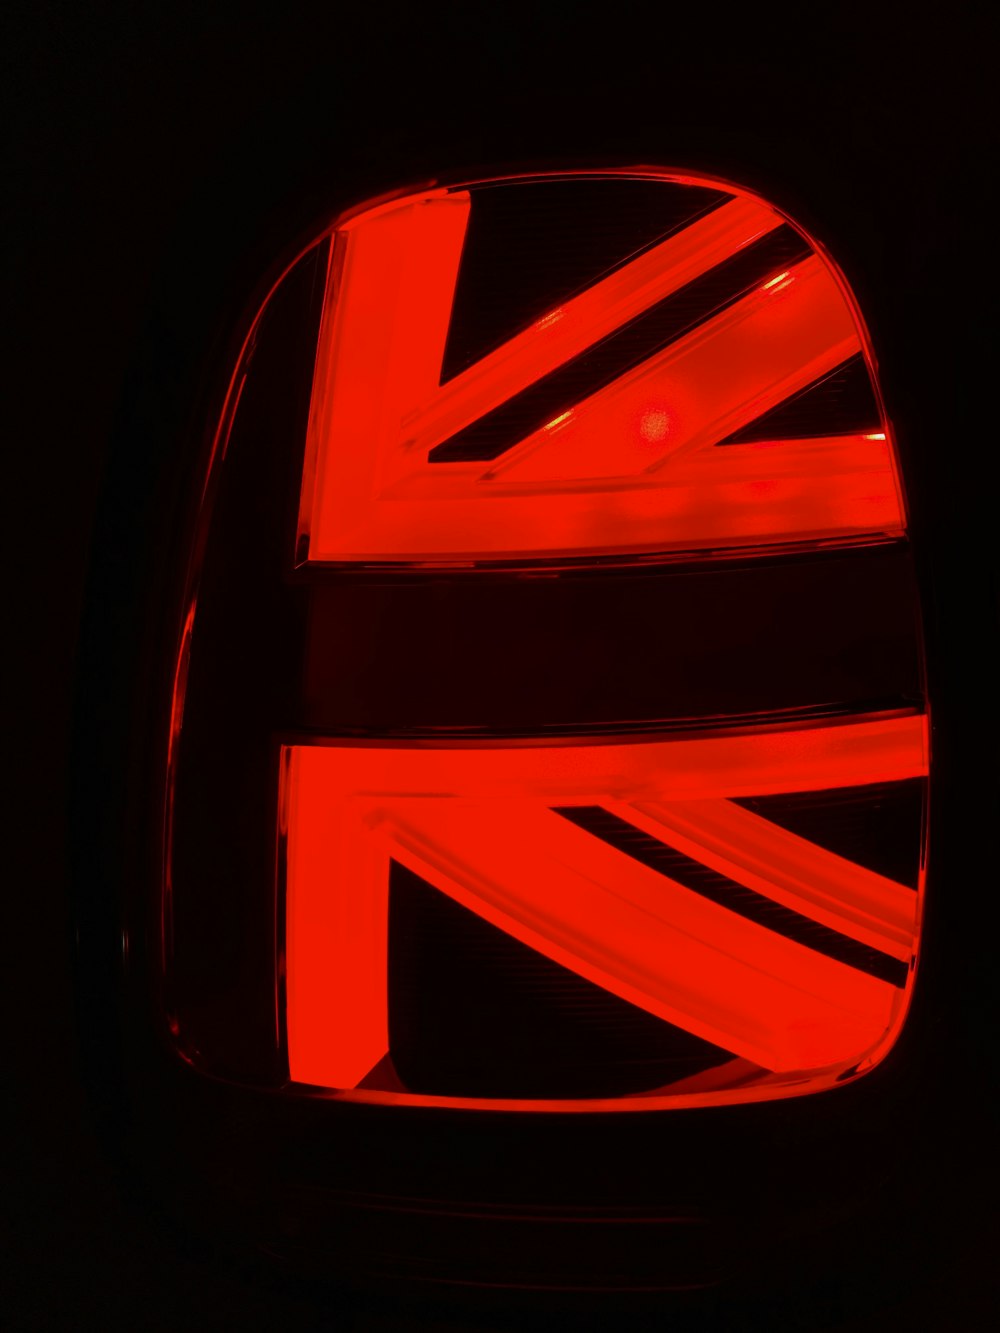 a car emblem with the british flag painted on it